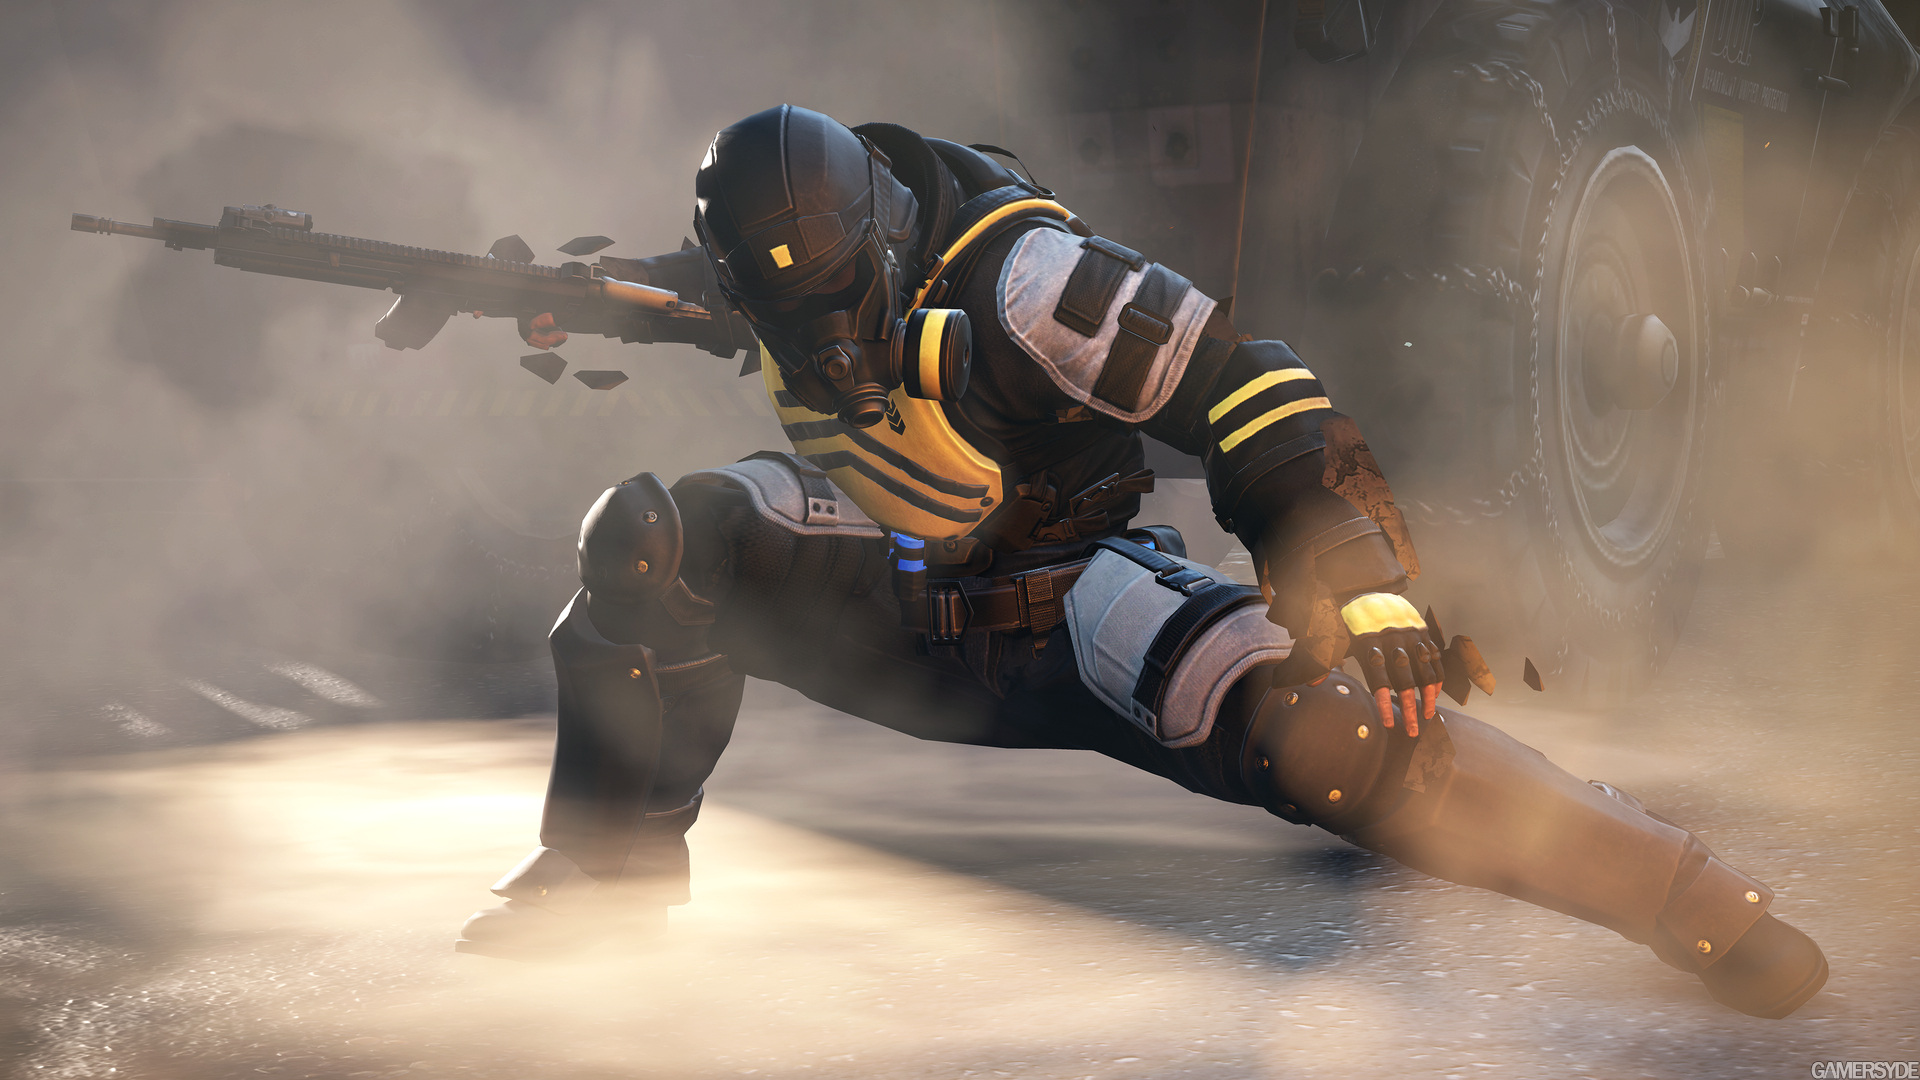 image_infamous_second_son-22858-2661_0001.jpg